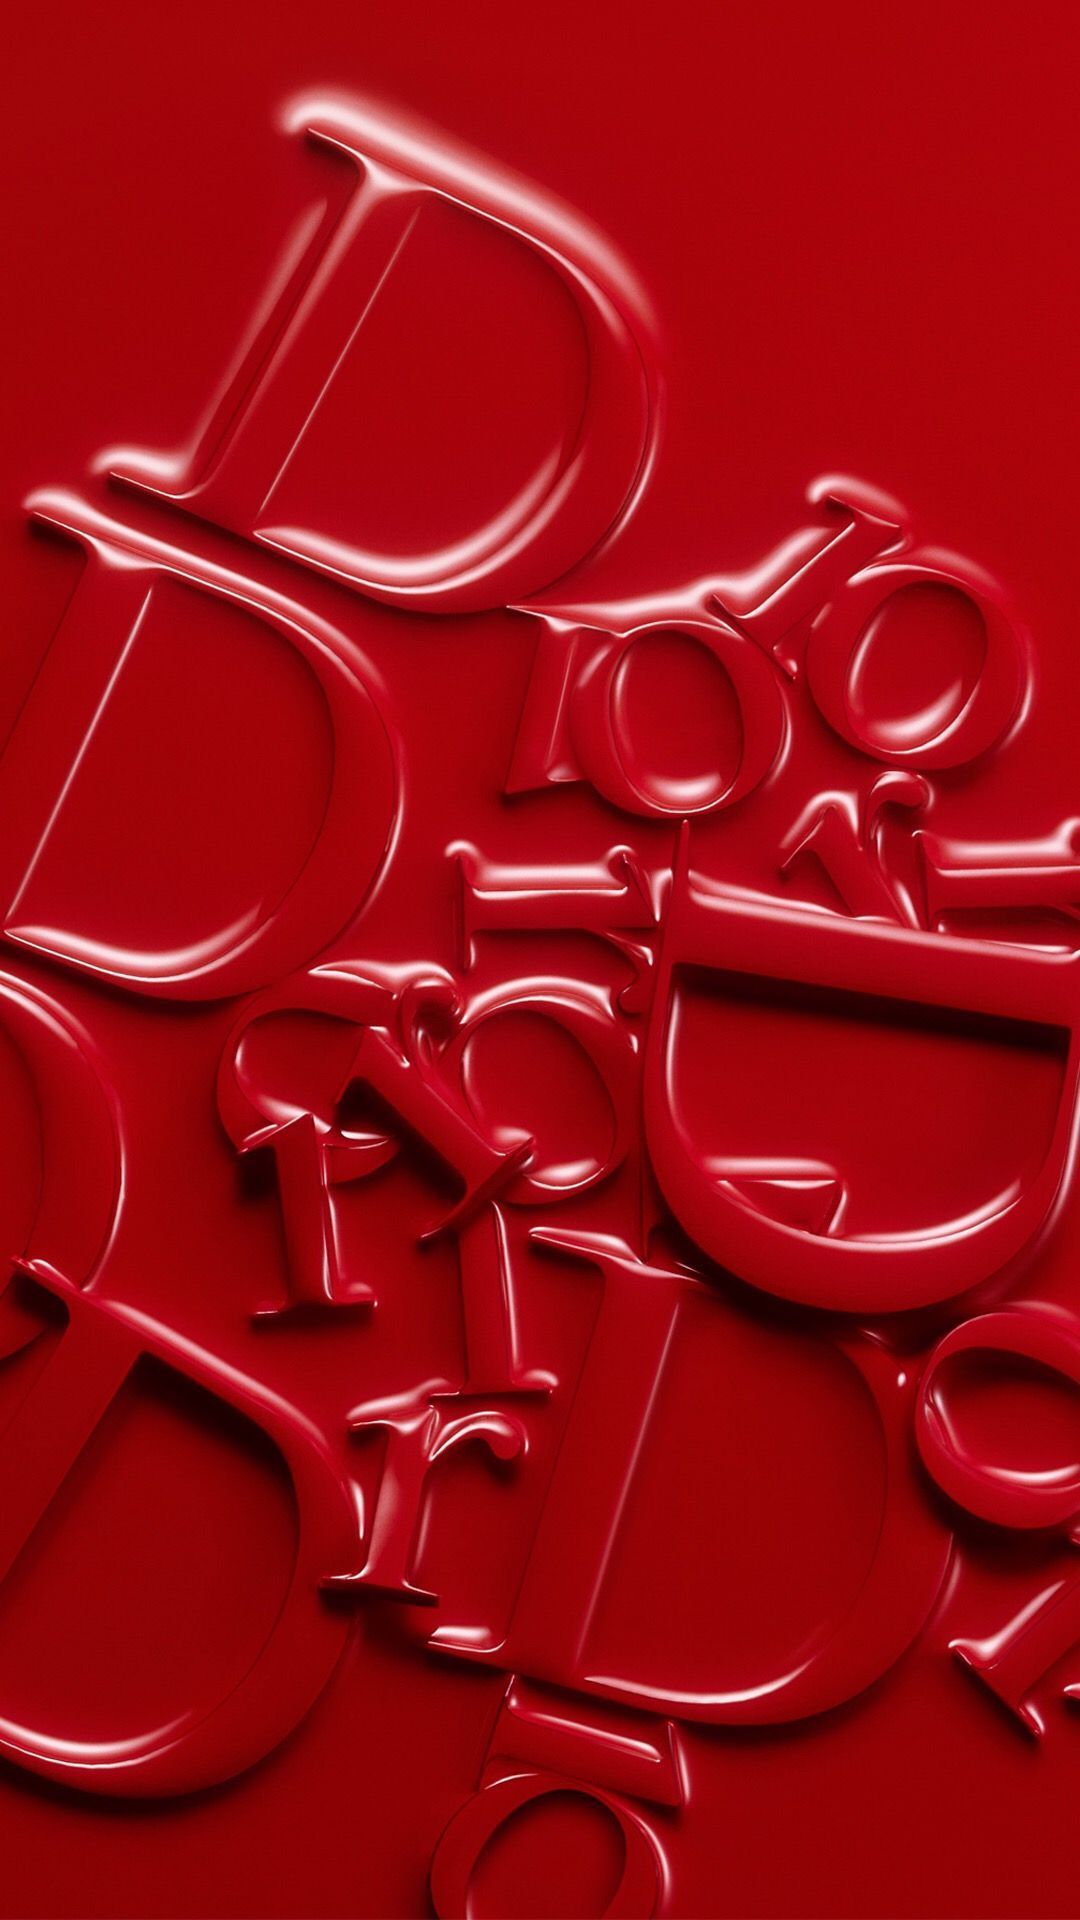 A close up of some letters on red - Dior